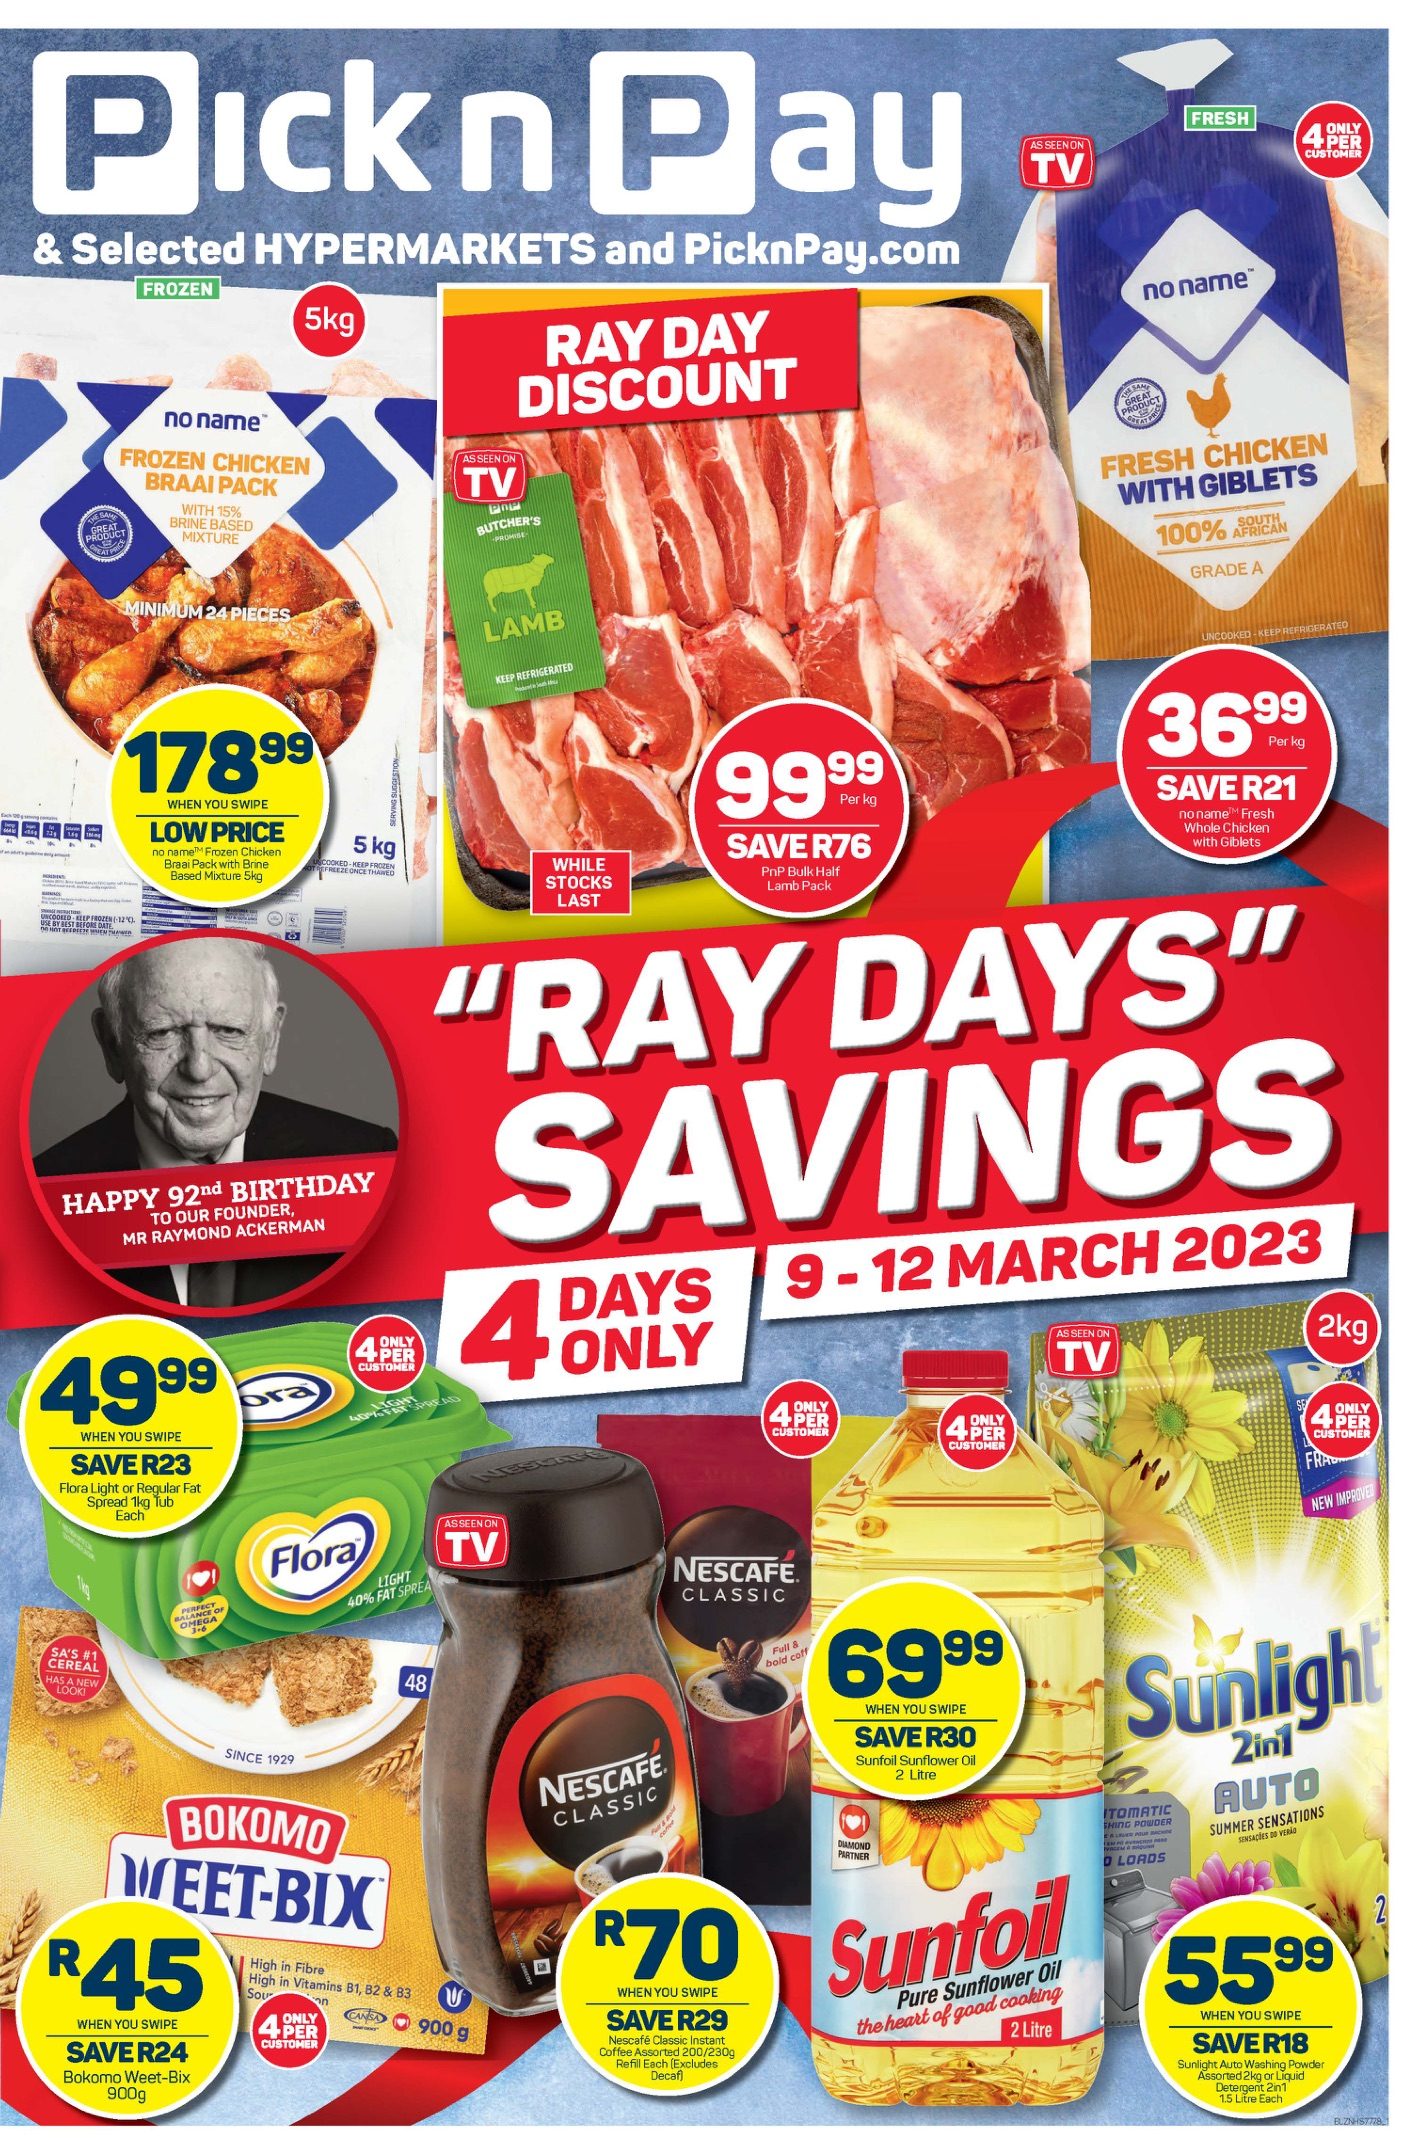 Pick n Pay Specials 9 March 2023 Pick n Pay Catalogue RayDay